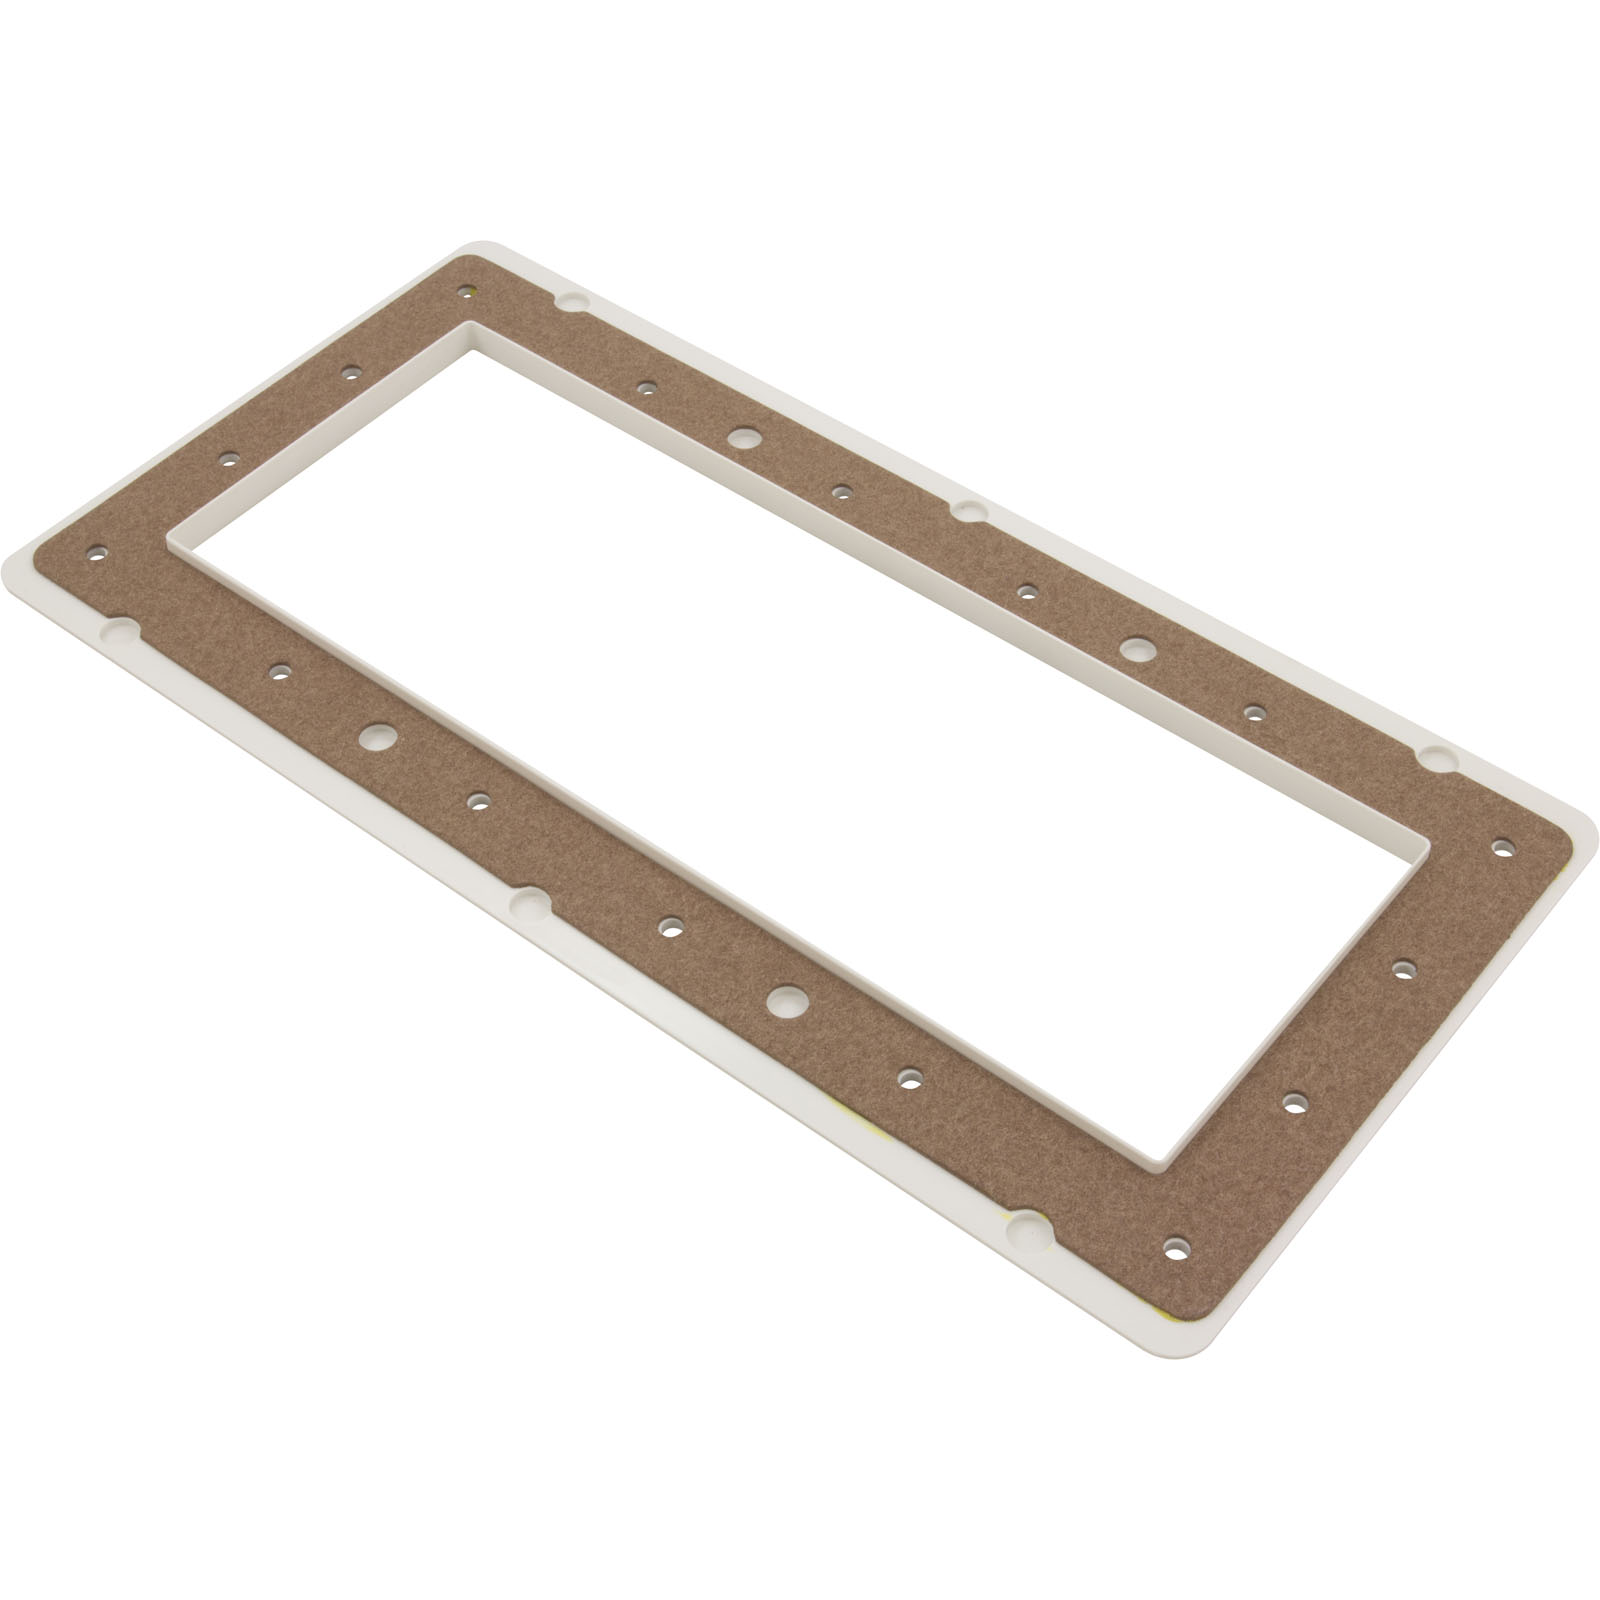 Picture of 19-0100-0 Skimmer Faceplate Kafko Equator White w/Gasket